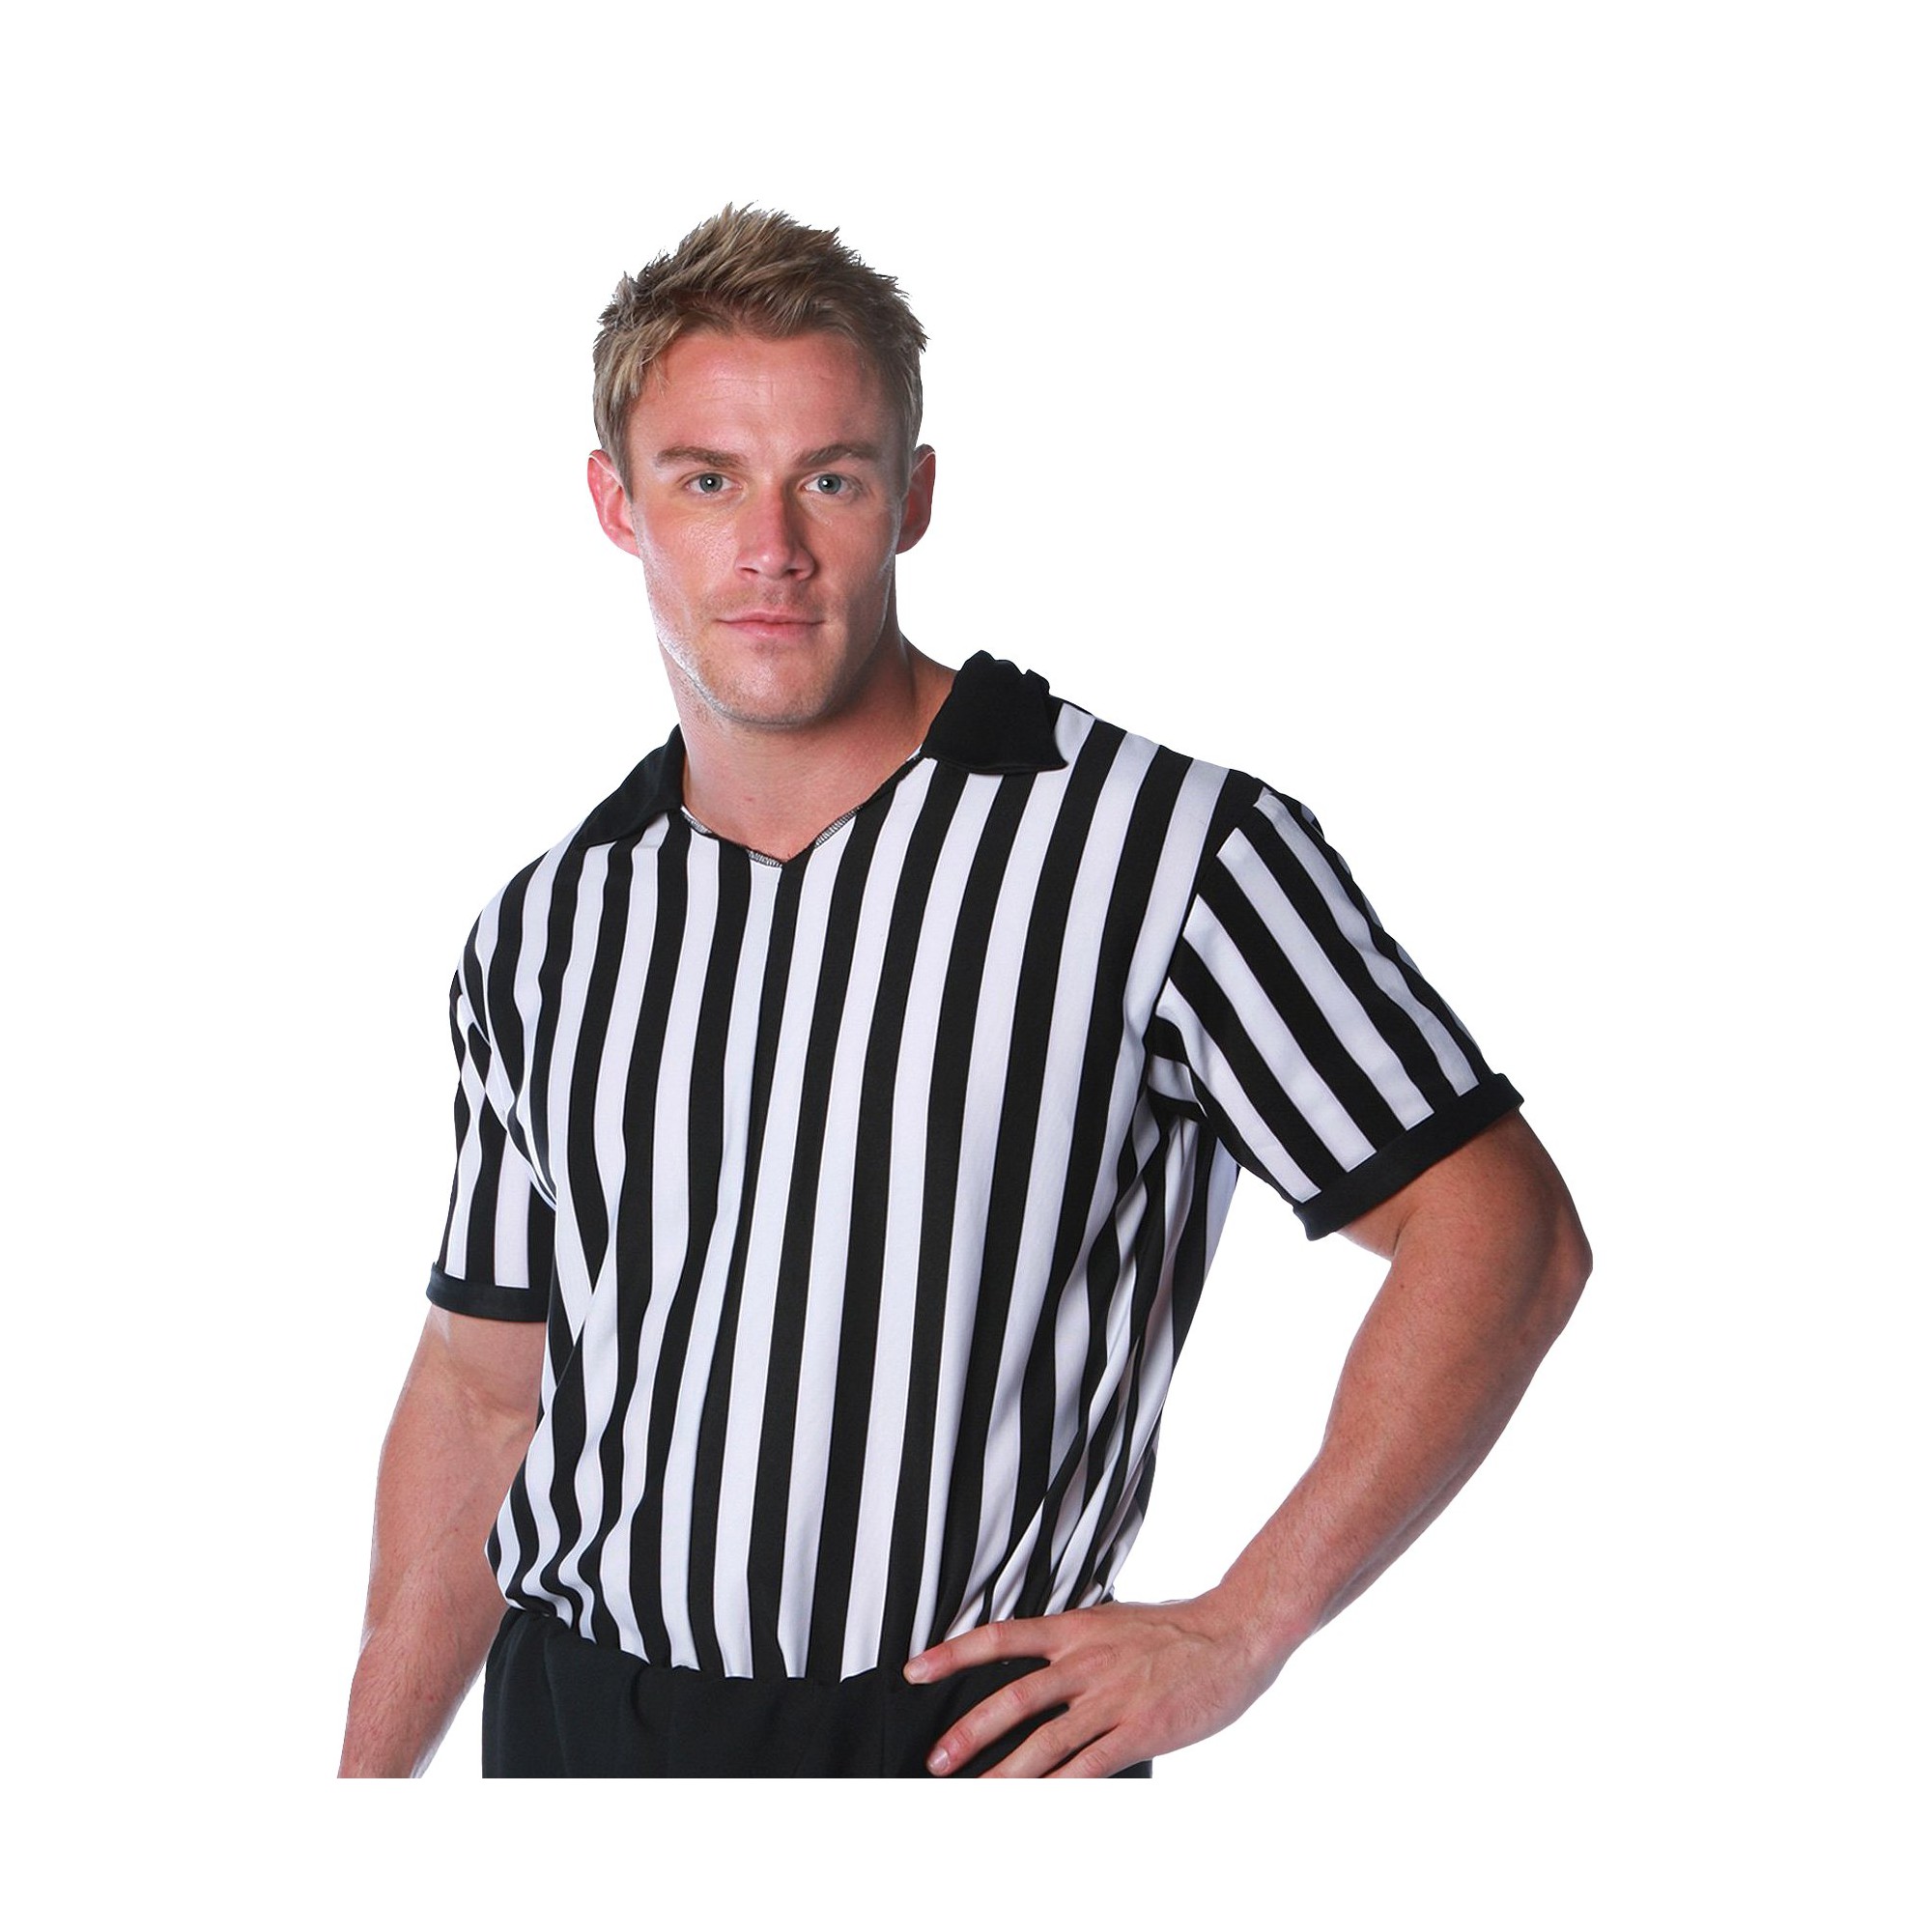 Halloween Adult Referee Costume - XX-Large, Men's, Size: XXL, MultiColored